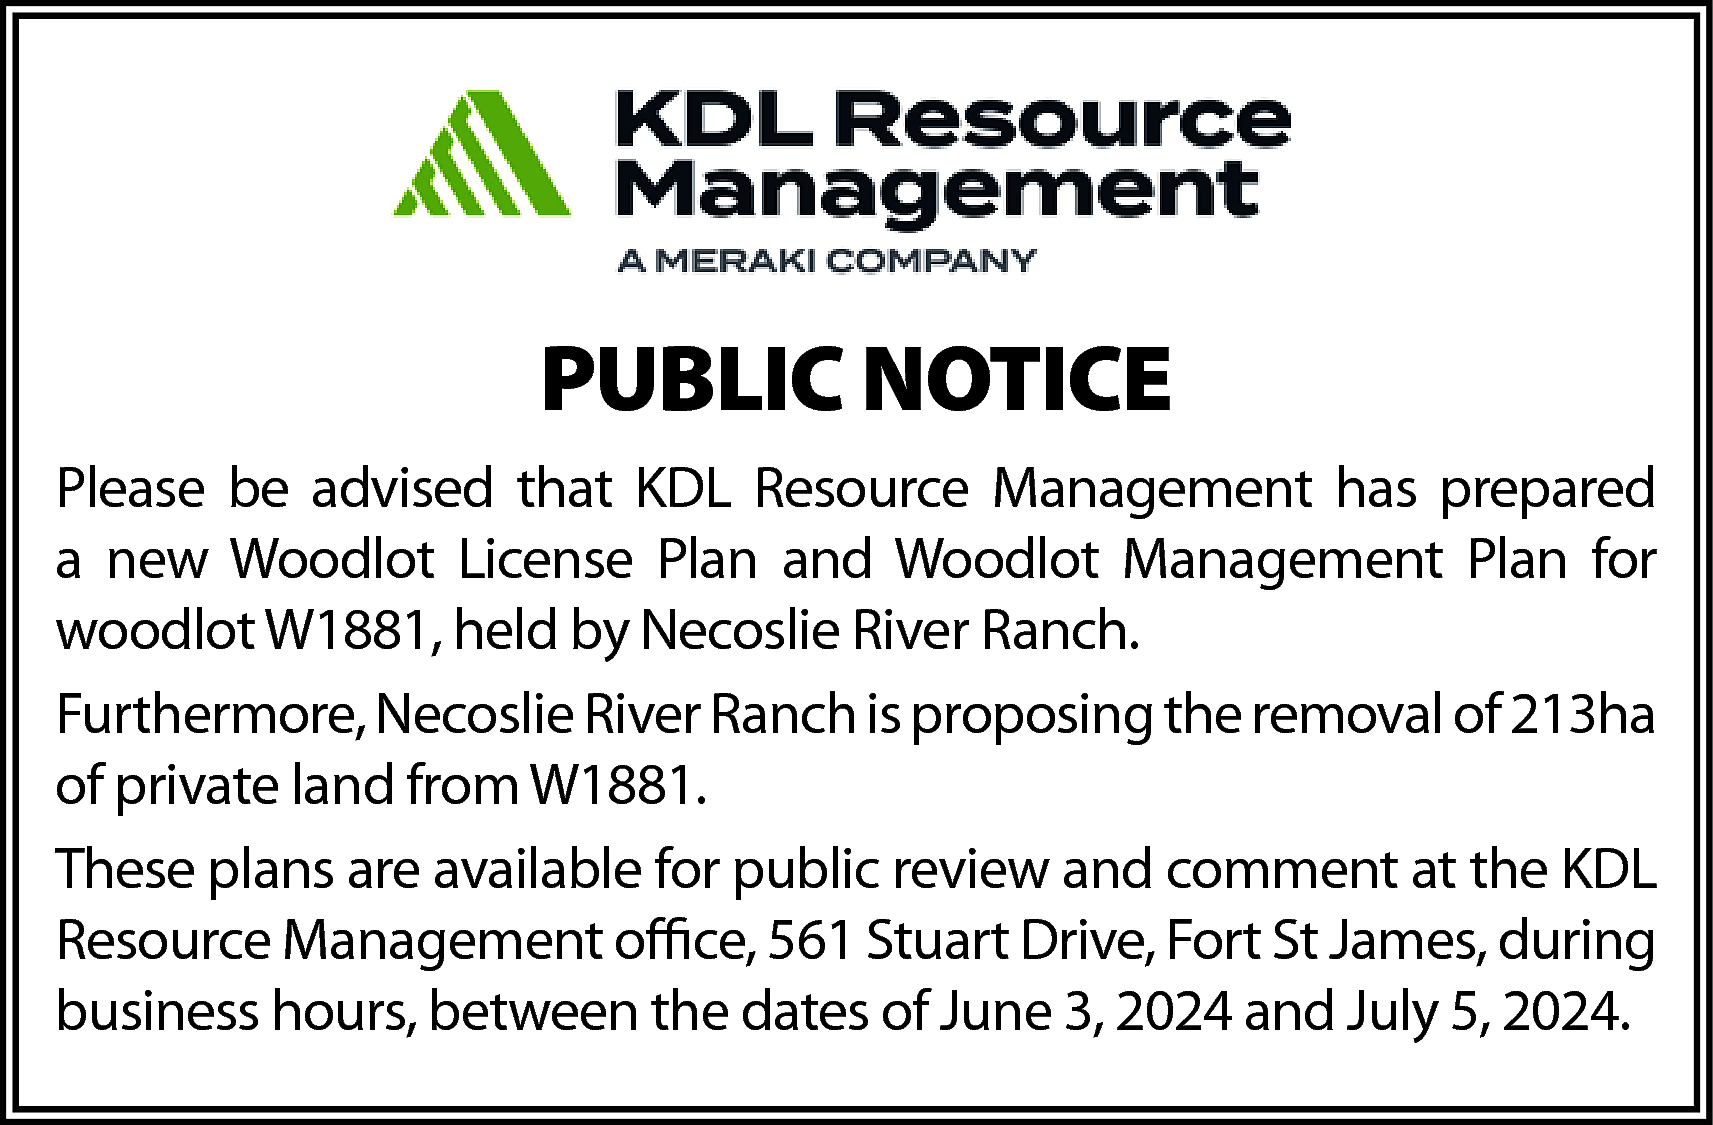 PUBLIC NOTICE <br>Please be advised  PUBLIC NOTICE  Please be advised that KDL Resource Management has prepared  a new Woodlot License Plan and Woodlot Management Plan for  woodlot W1881, held by Necoslie River Ranch.  Furthermore, Necoslie River Ranch is proposing the removal of 213ha  of private land from W1881.  These plans are available for public review and comment at the KDL  Resource Management office, 561 Stuart Drive, Fort St James, during  business hours, between the dates of June 3, 2024 and July 5, 2024.    